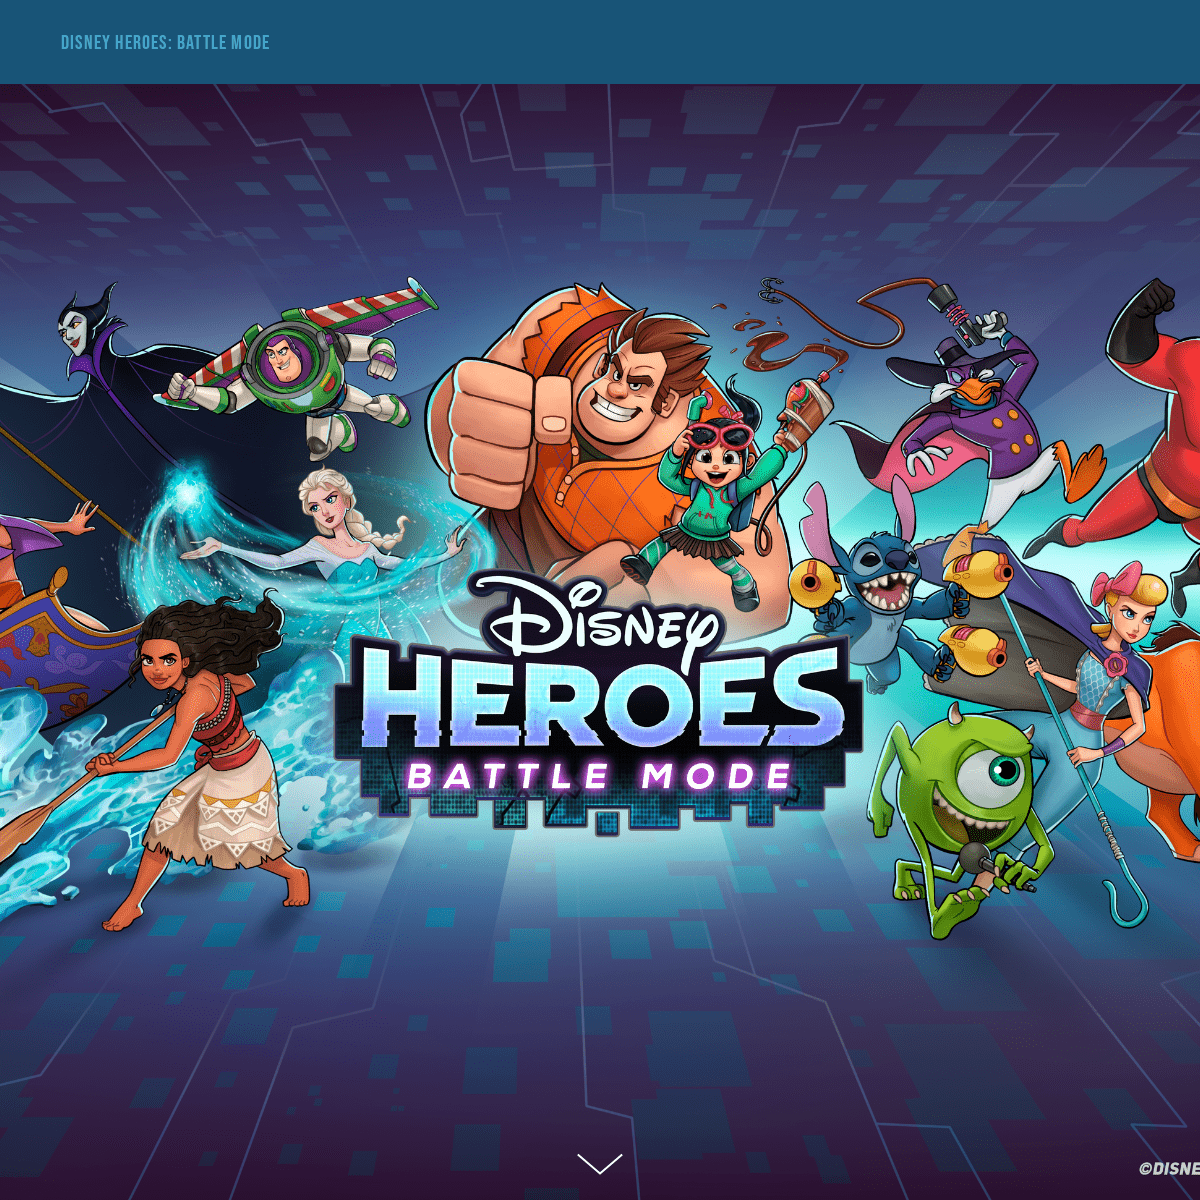 A complete backup of disneyheroesgame.com